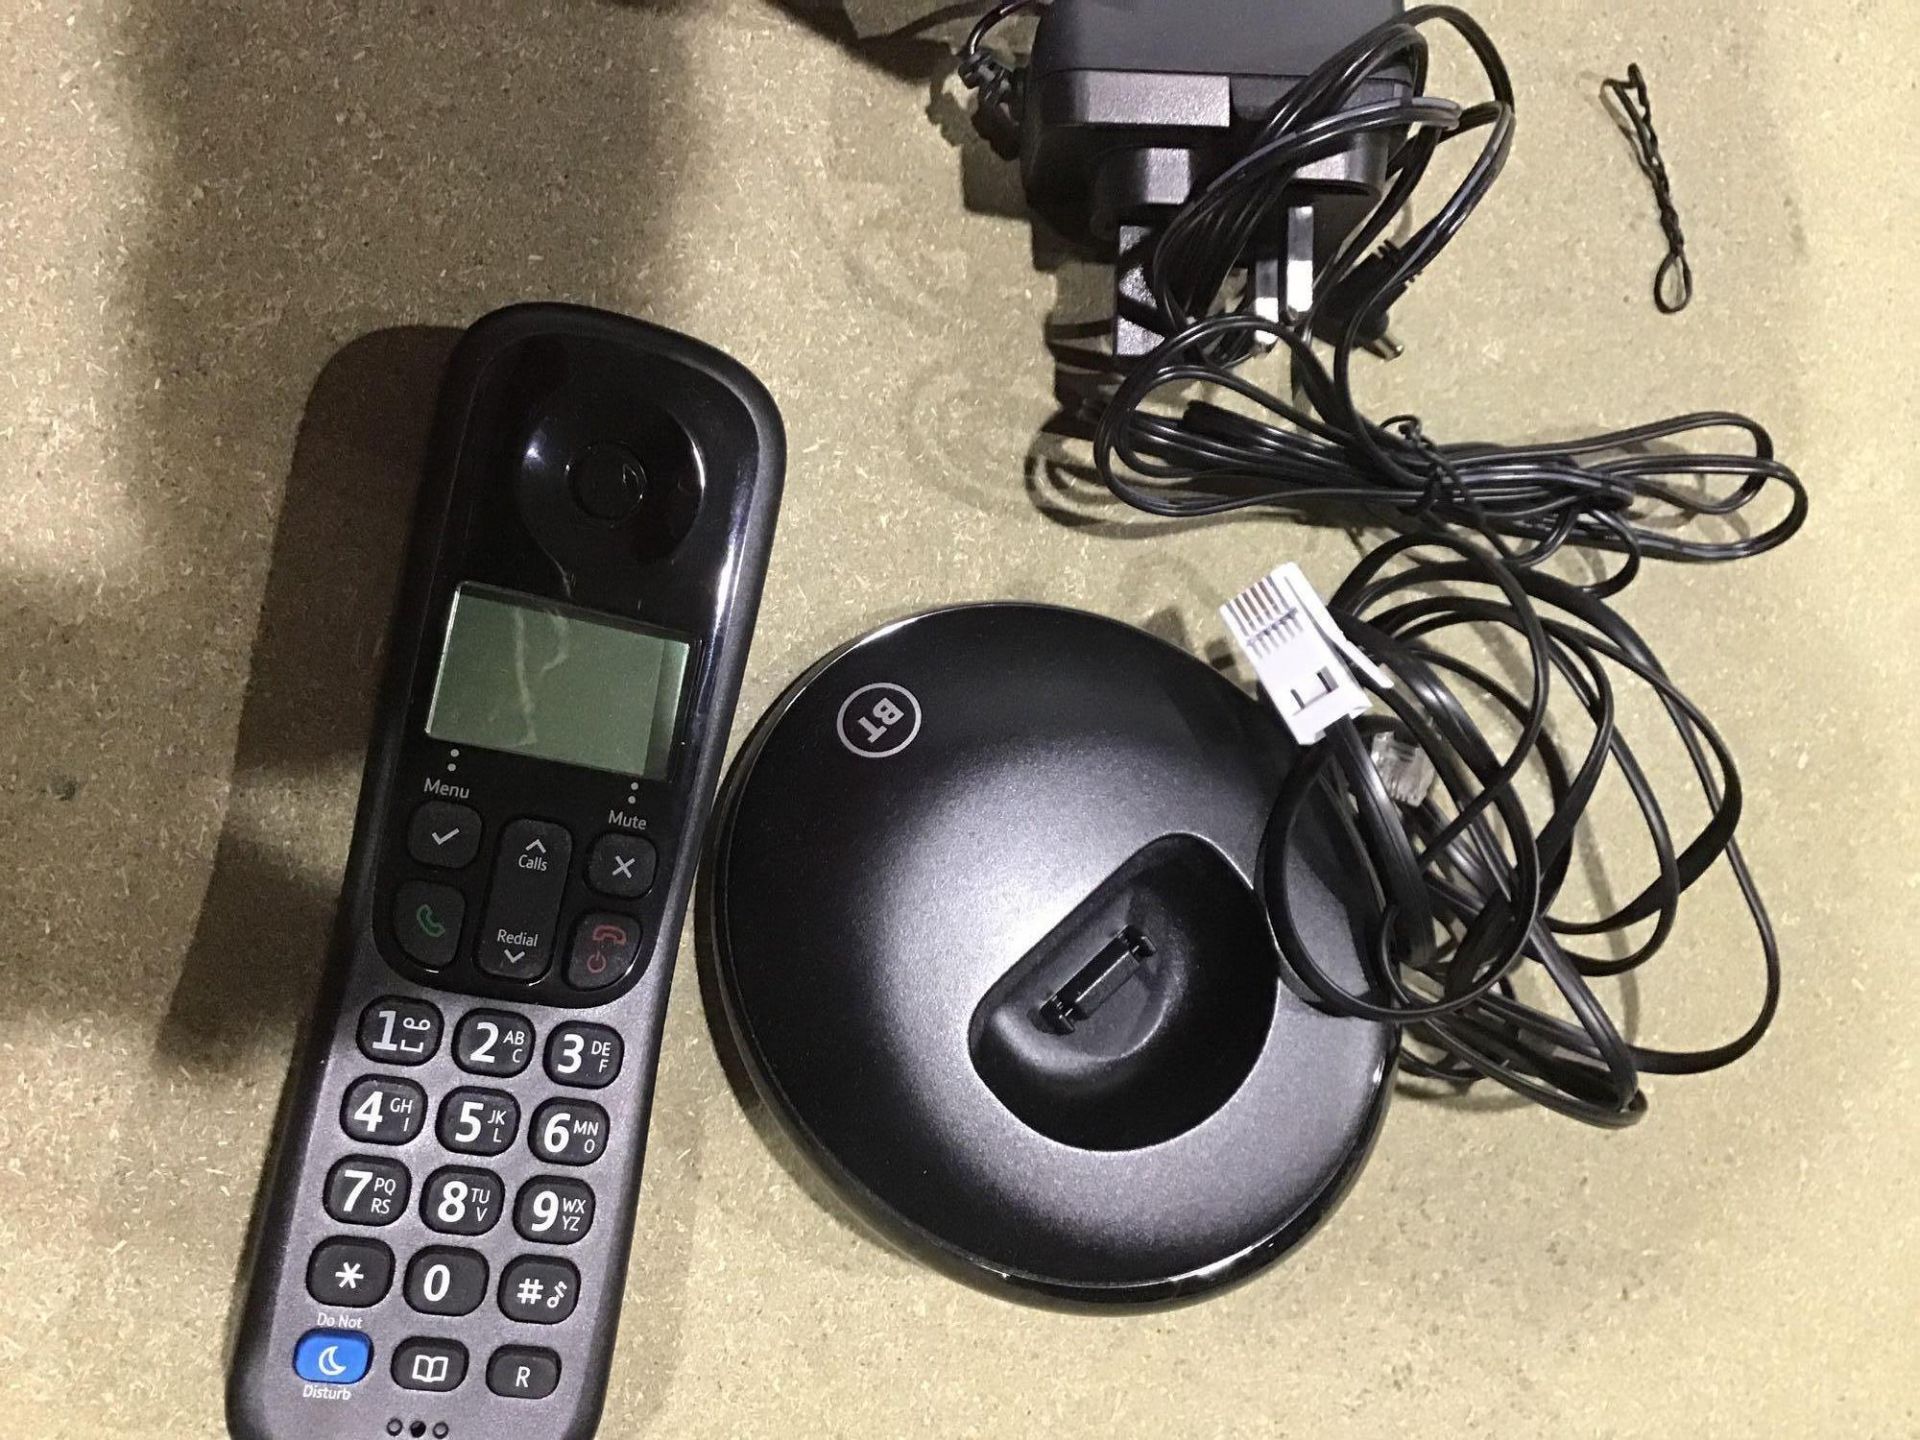 BT Everyday Cordless Home Phone with Basic Call Blocking, Single Handset Pack, Black £19.99 RRP - Image 2 of 4